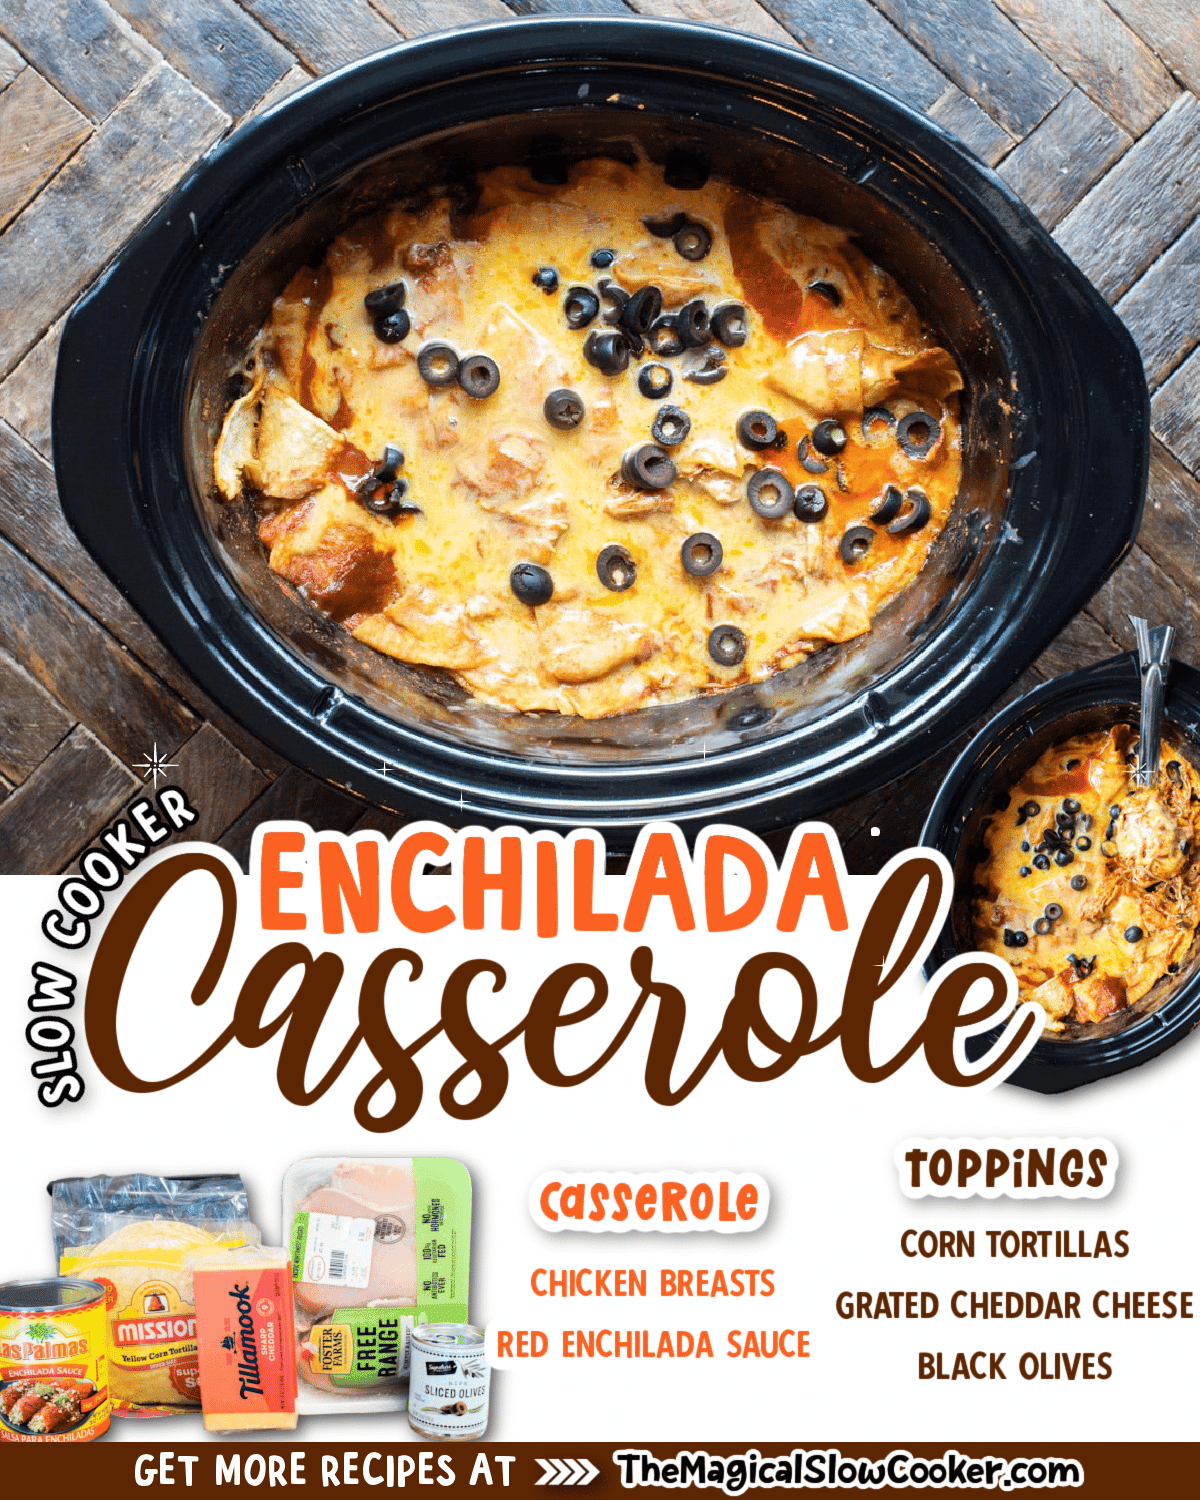 Collage of chicken enchilada images with text of what ingredients are.